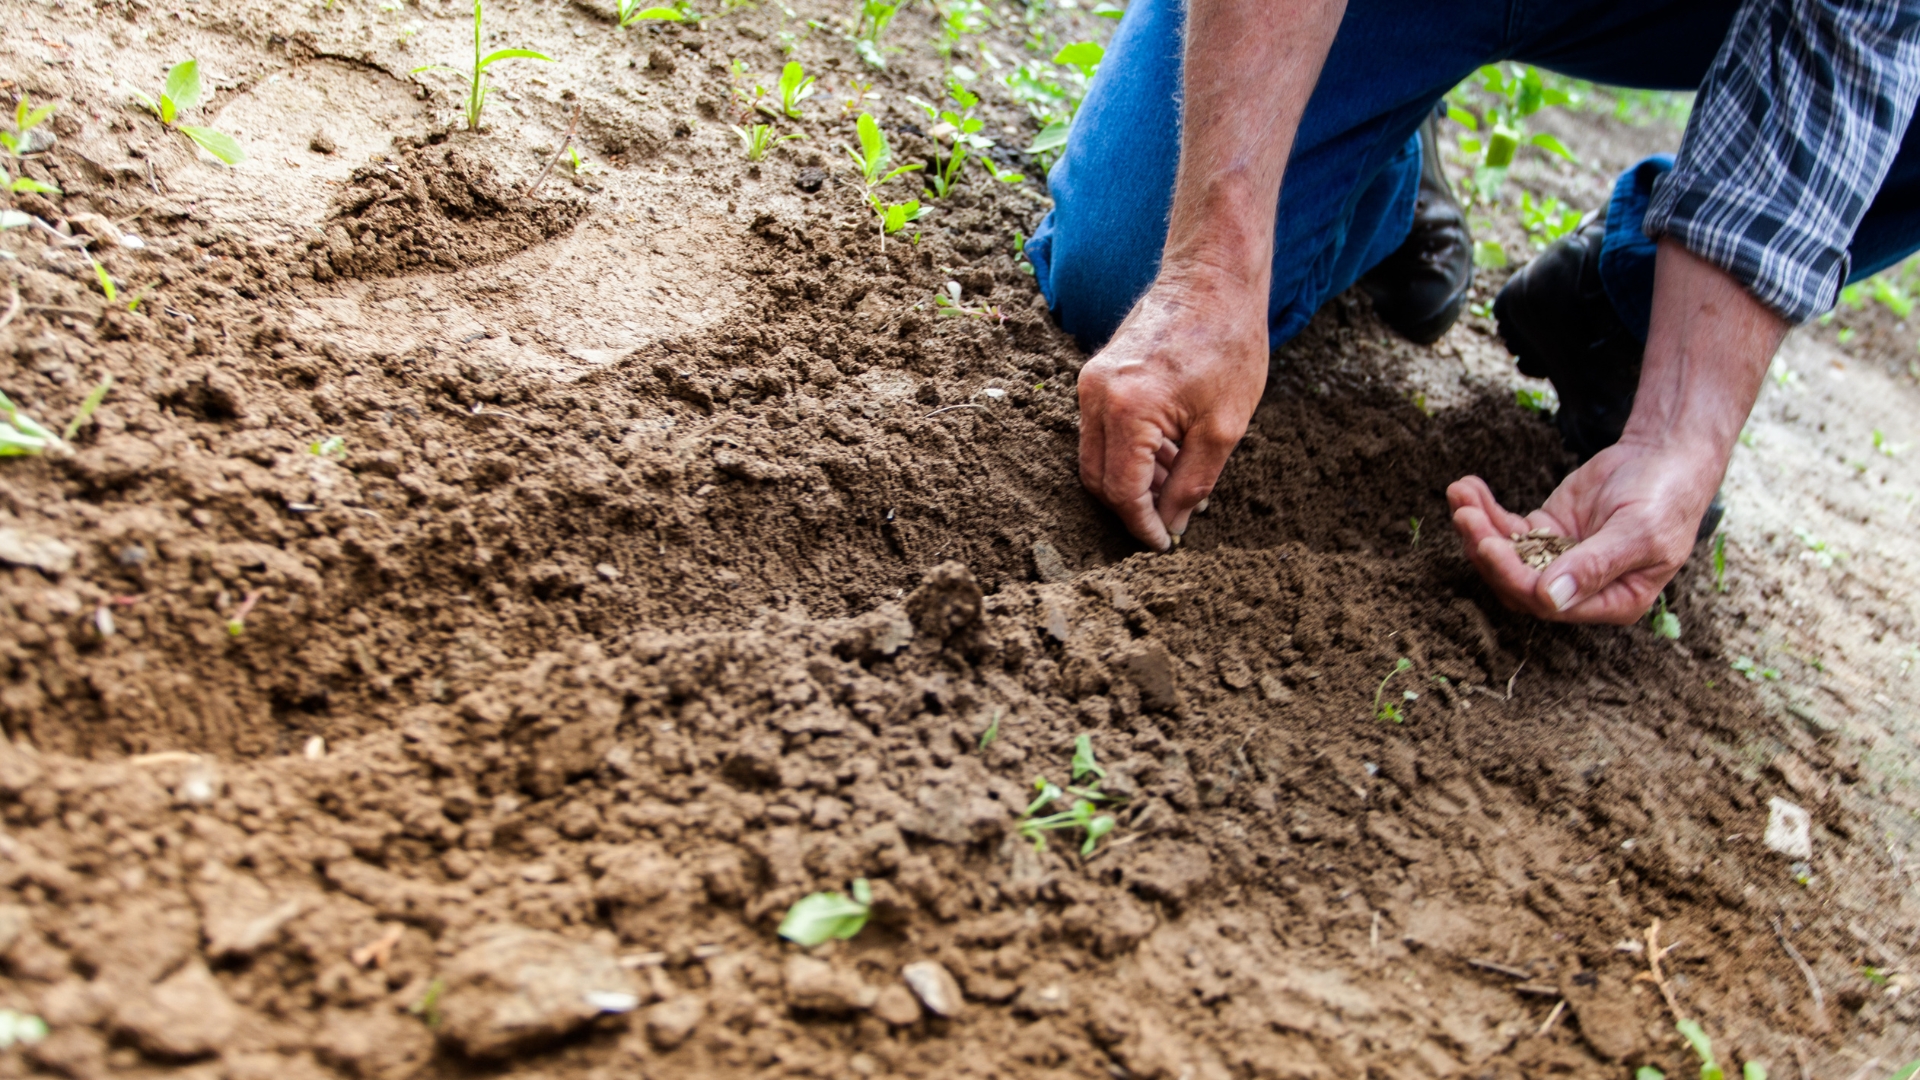 Here’s A Brilliant Garden Hack That Protects Newly-Planted Seeds